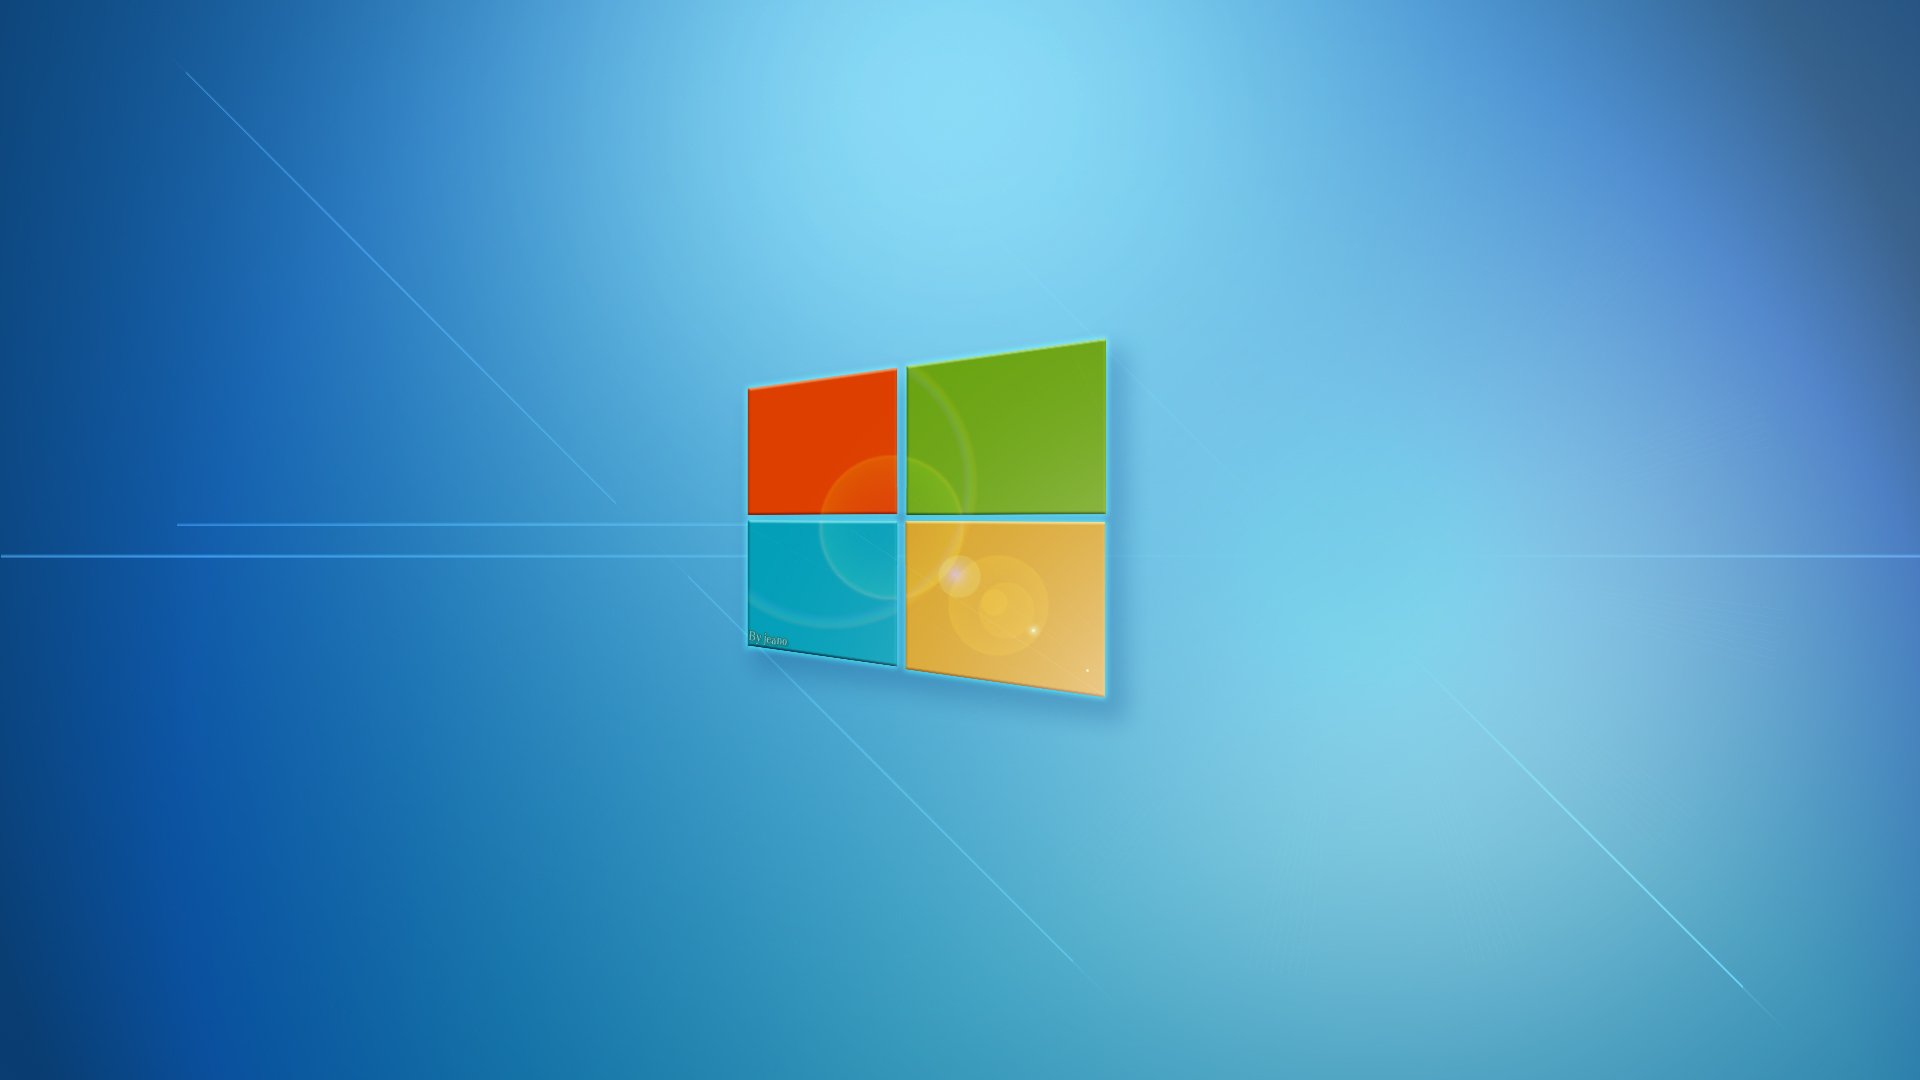 Windows 8 Backgrounds Download these 44 hd windows 8